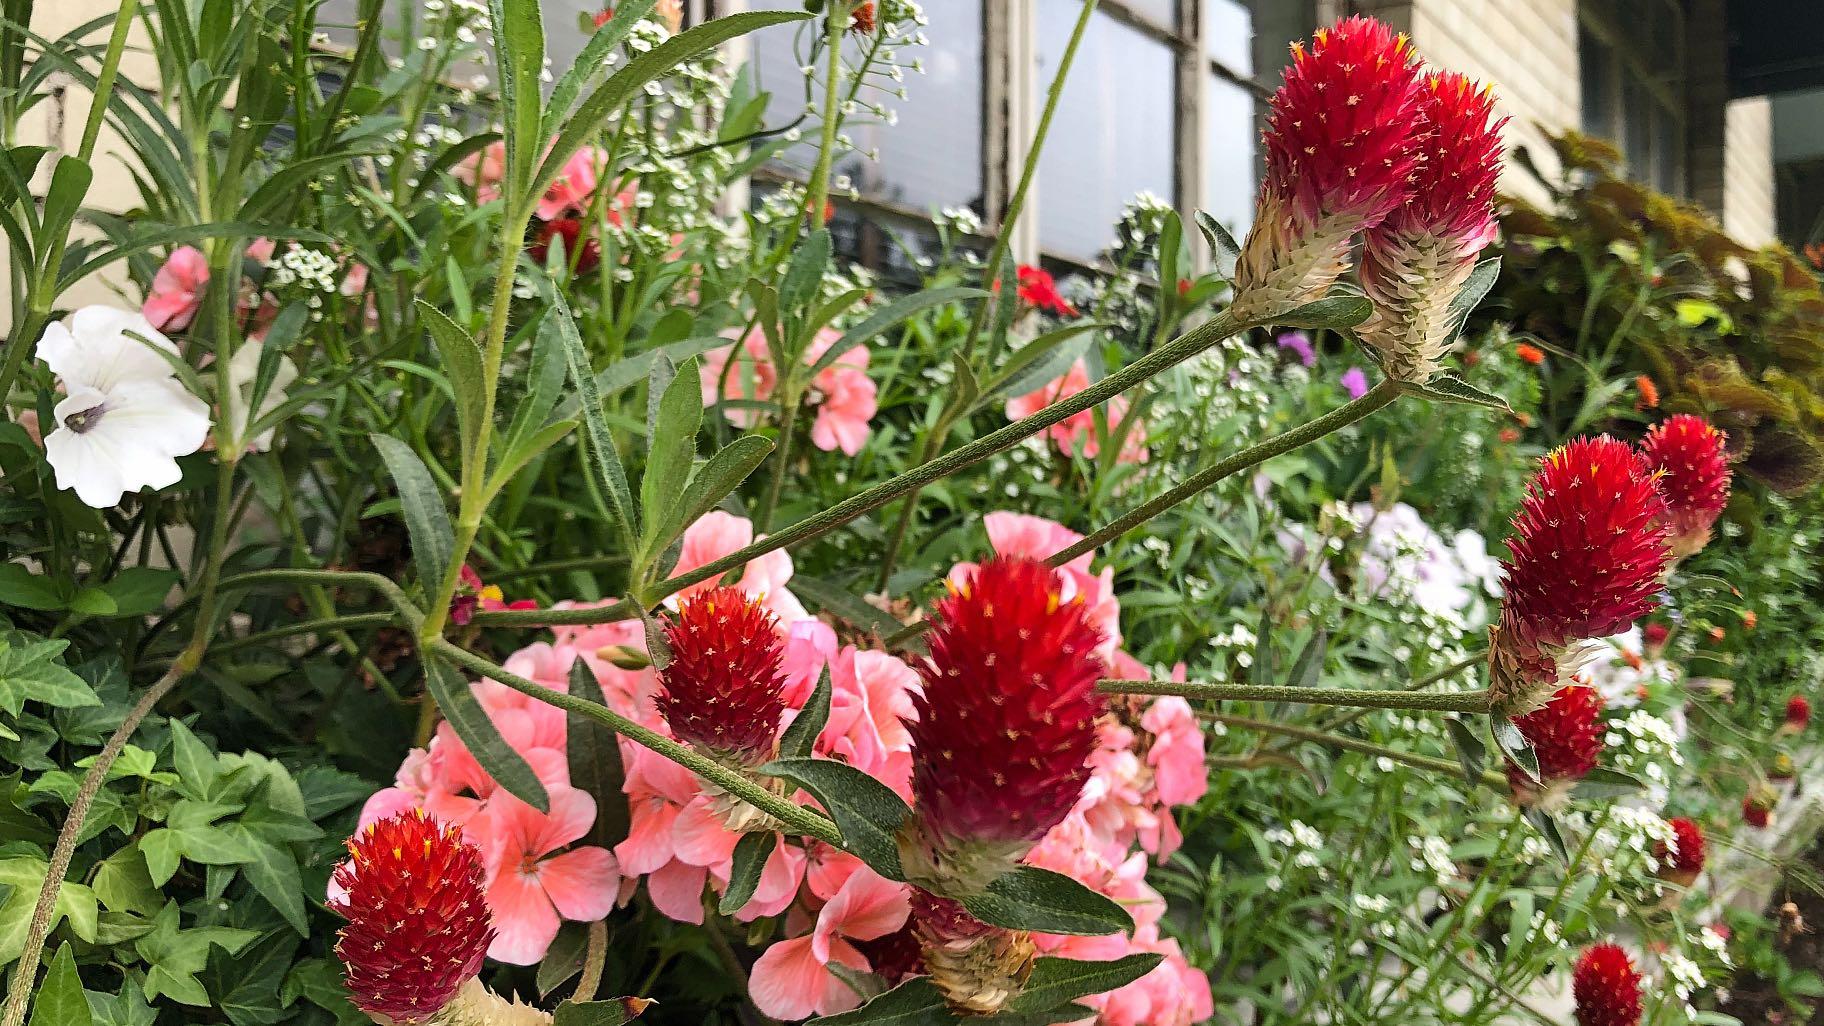 Porter liked to paint strawberries. The exhibit incorporate not only the actual fruit, but the flower gomphrena (aka, globe amaranth), chosen because it looks like strawberries. (Patty Wetli / WTTW News)